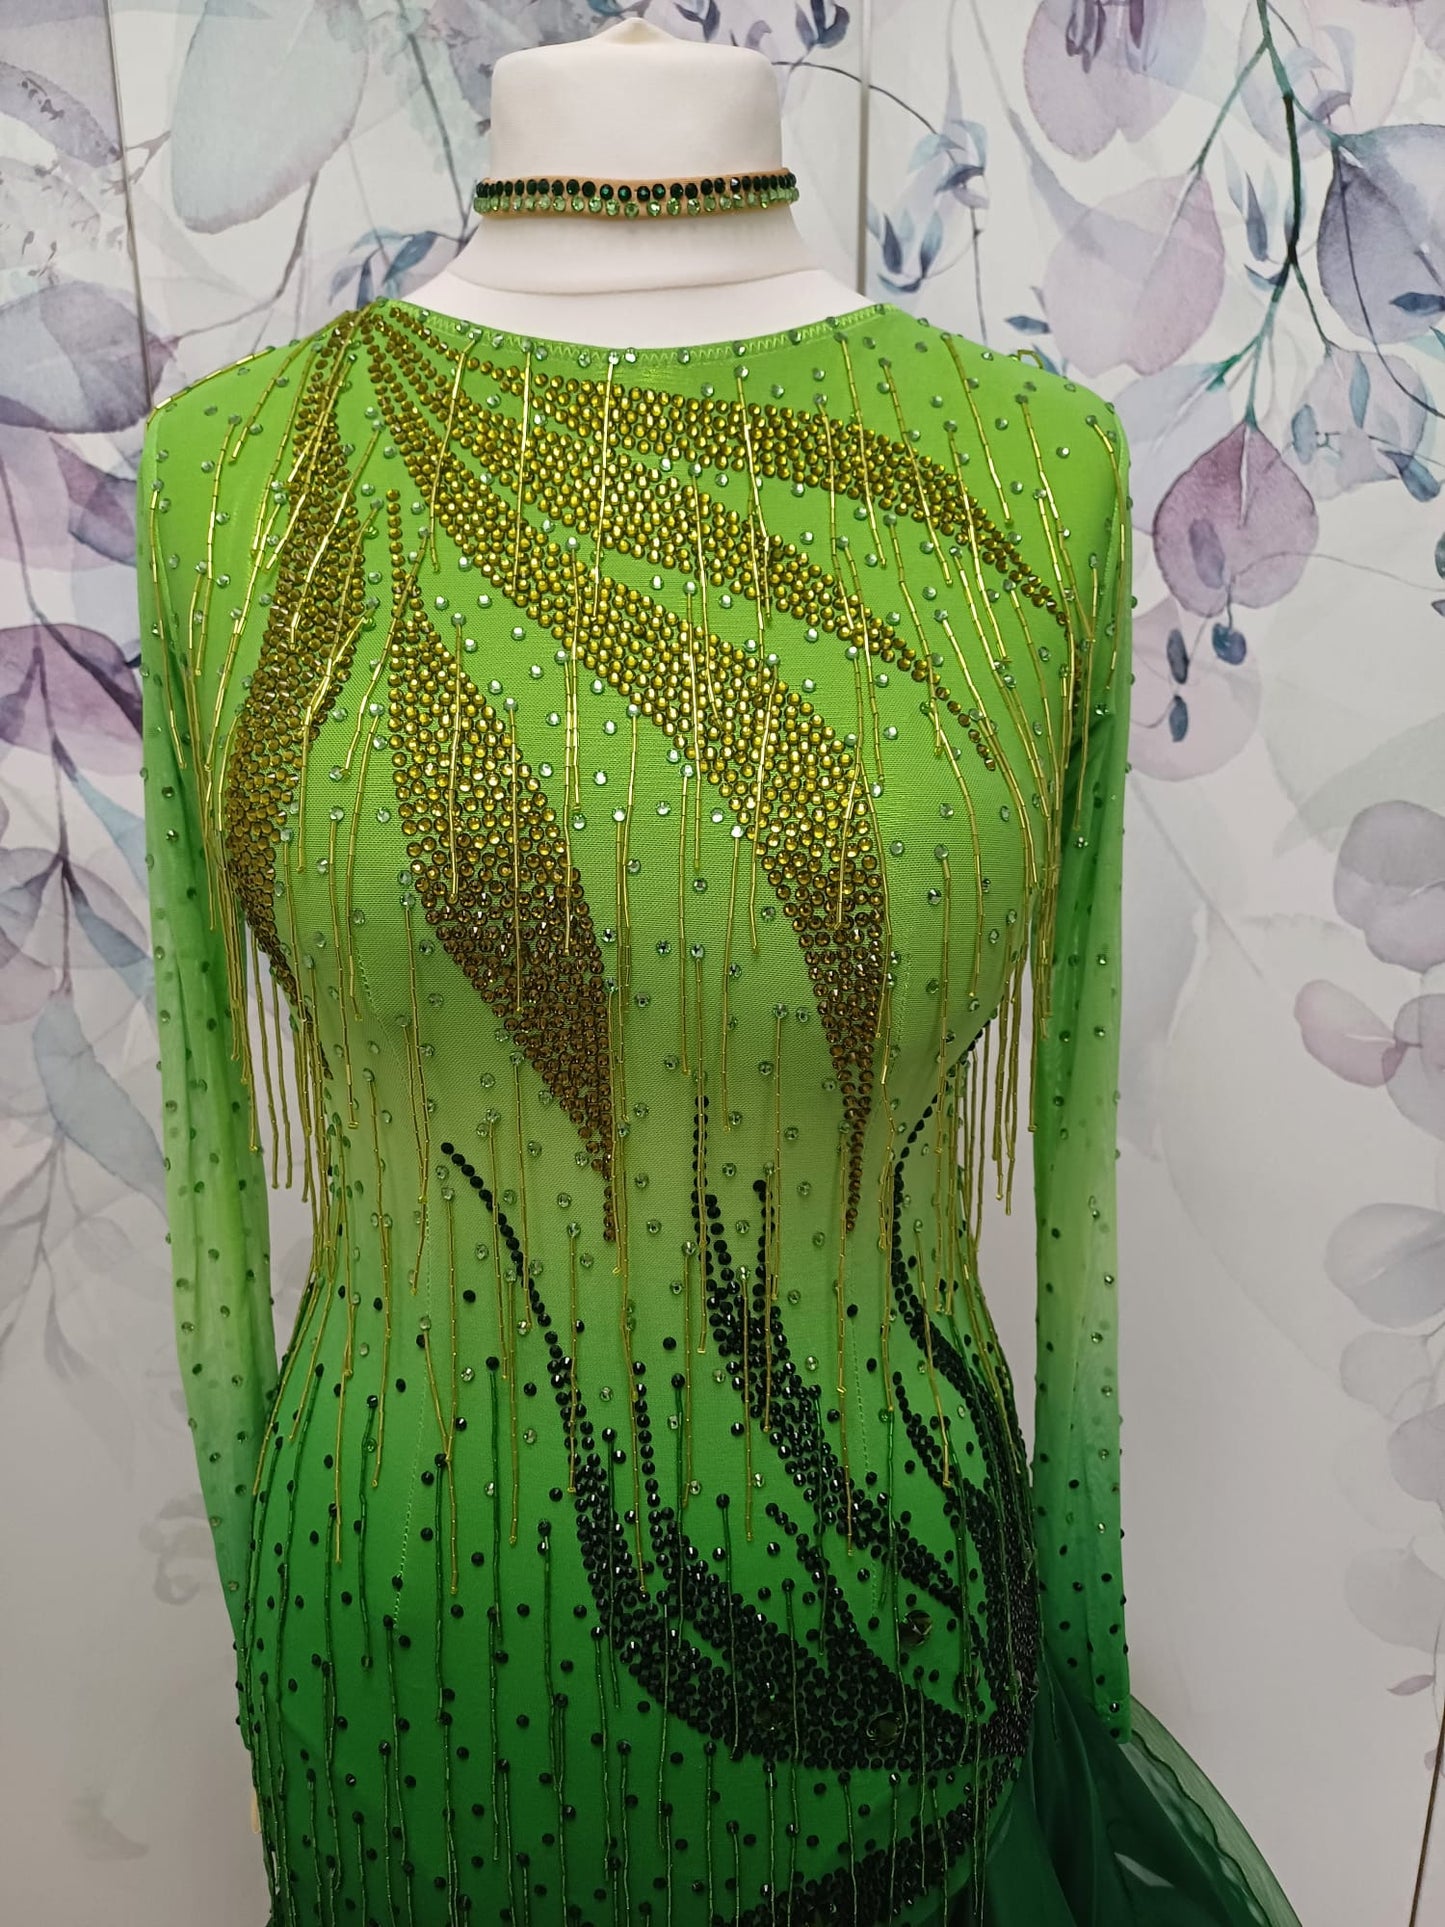 125 Apple Green Ombre Latin dress. Chiffon skirts edged in crinoline. Stoned in Peridot, Olivine & Emerald. Includes Hold droppers to the front area with a mesh filled in back.